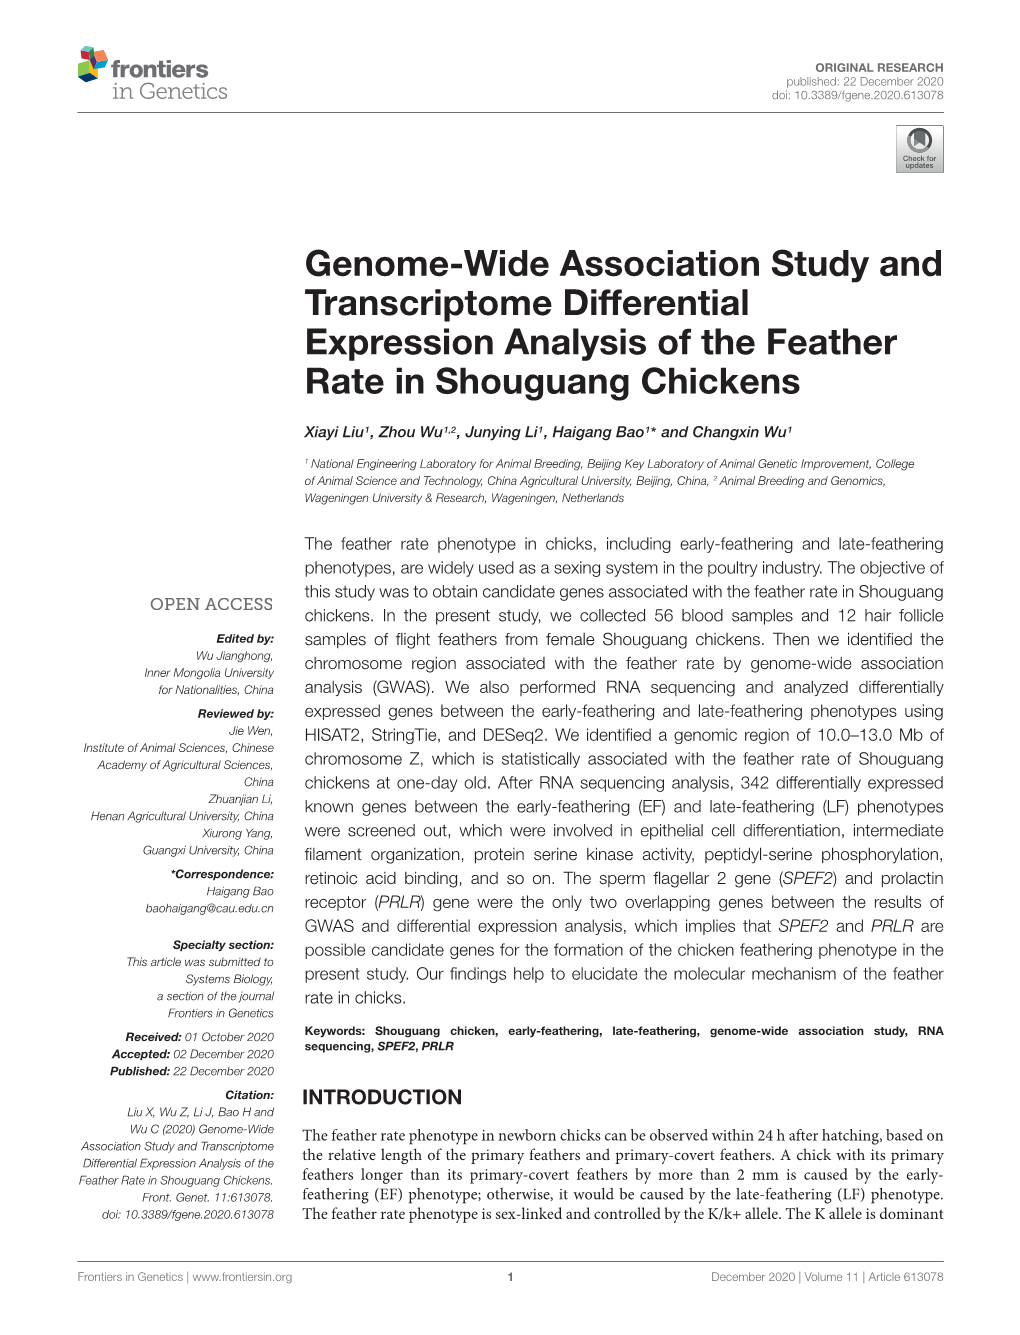 Genome-Wide Association Study and Transcriptome Differential Expression Analysis of the Feather Rate in Shouguang Chickens